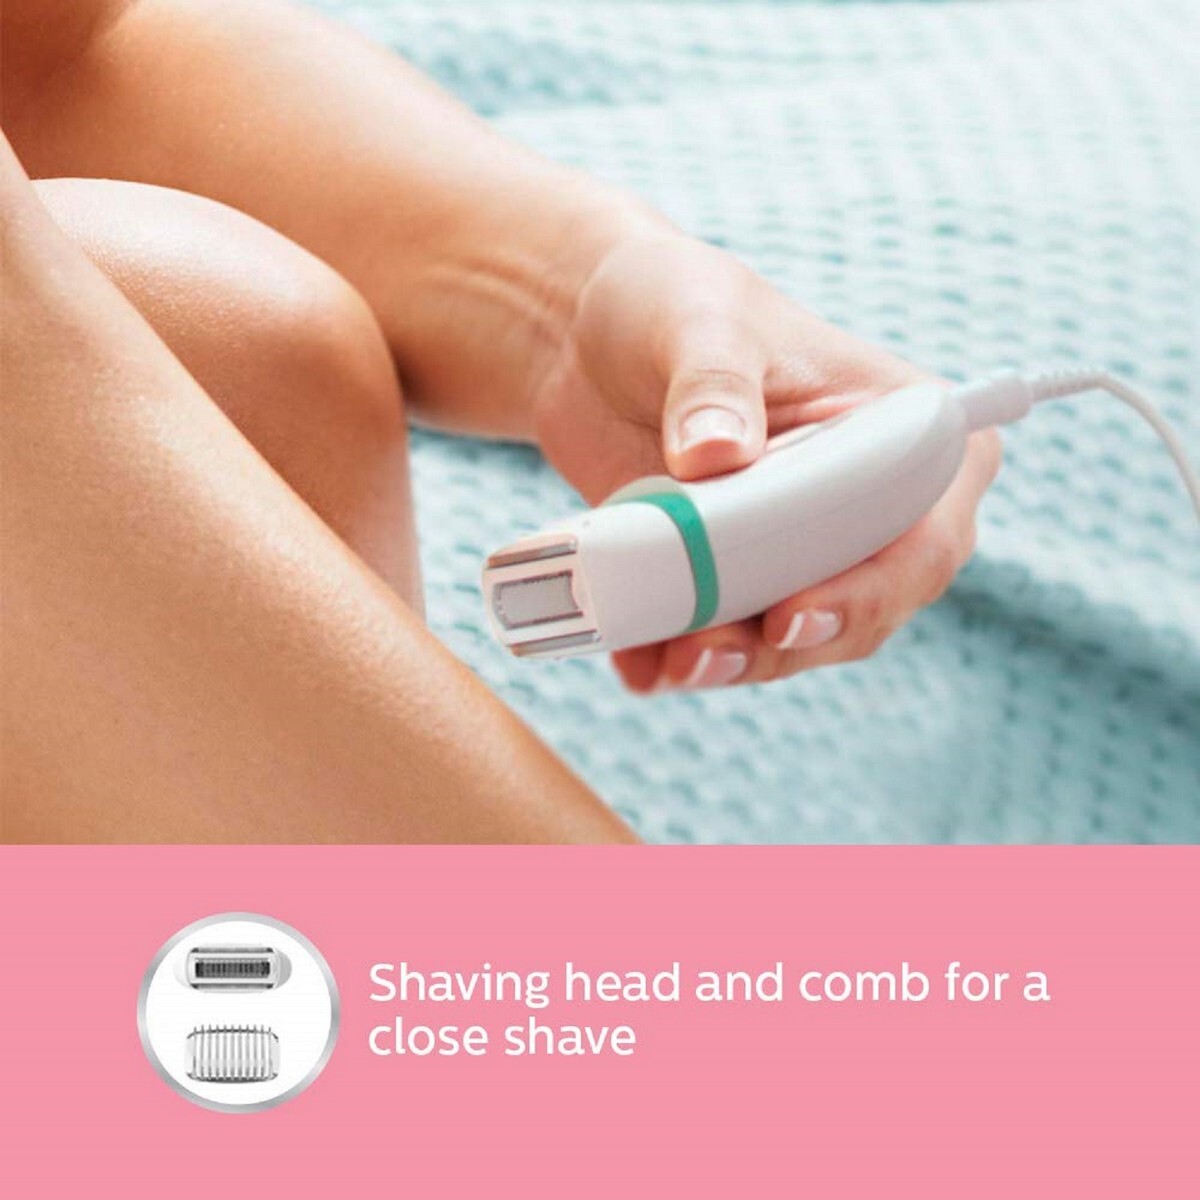 Philips BRE245/00 Corded Compact Epilator (2 in 1 - shaver and epilator) for gentle hair removal at home